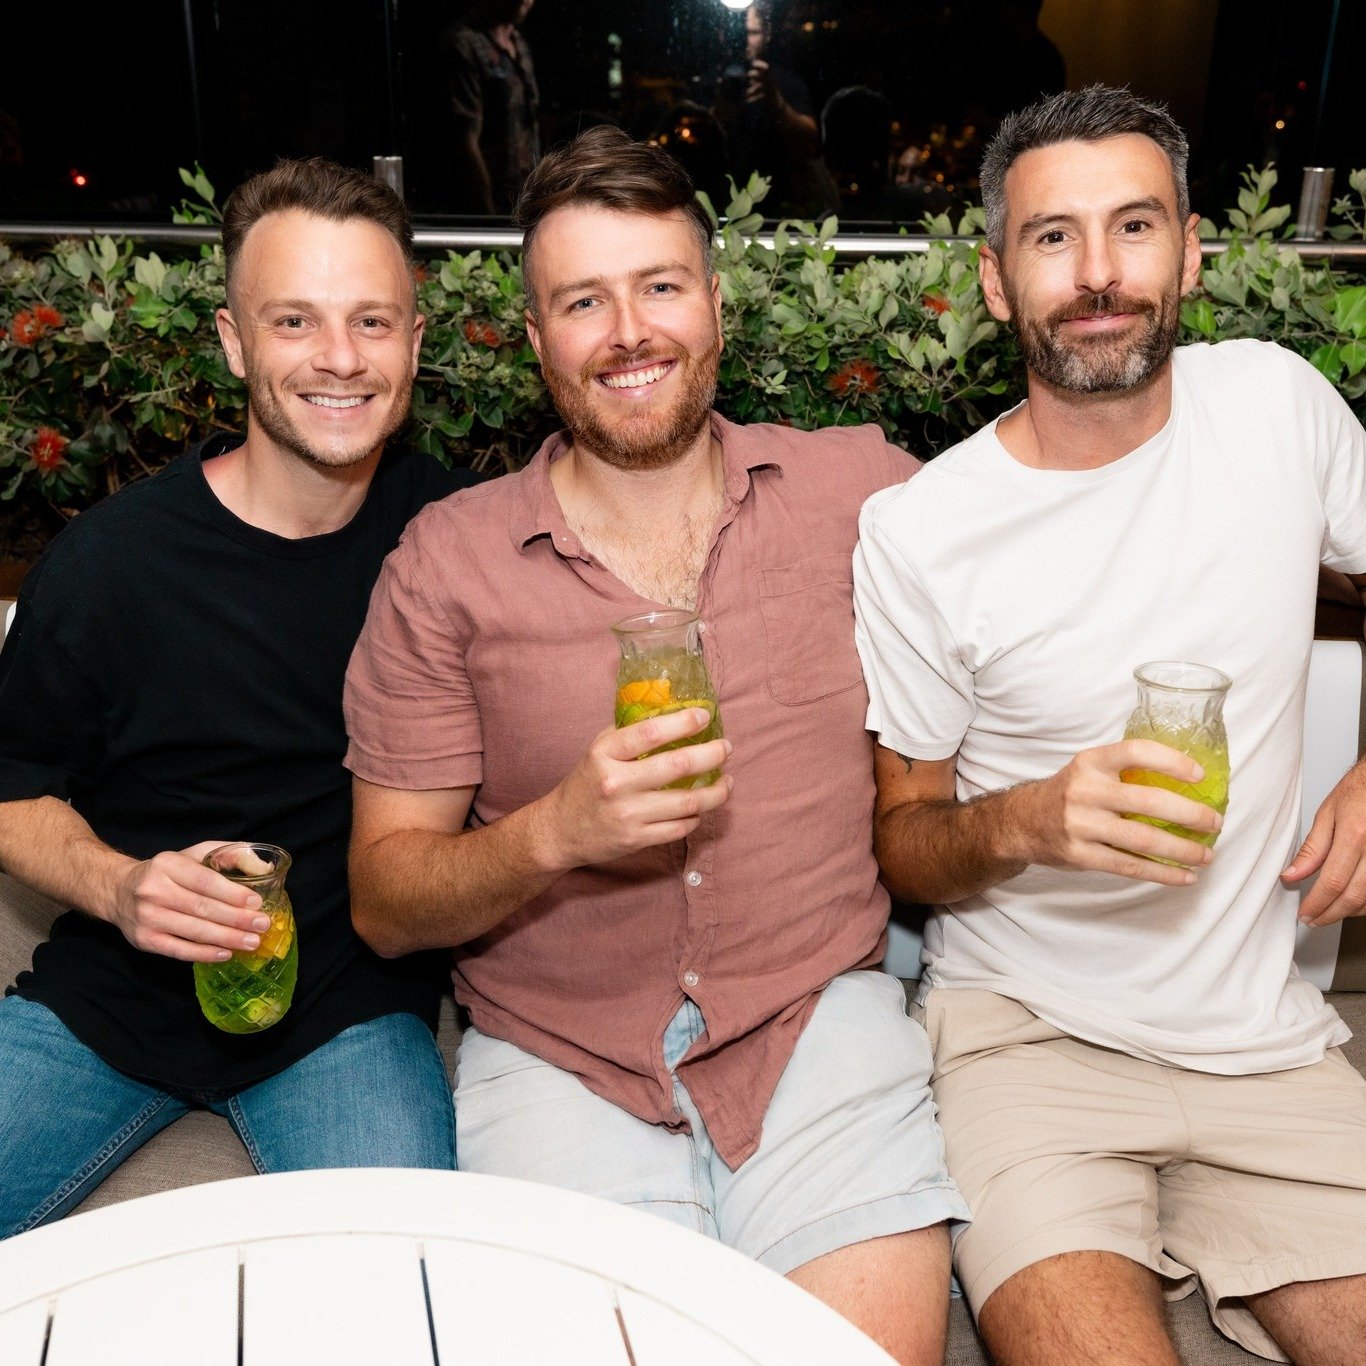 Leave your worries behind and enjoy a great evening with friends 🎉

Come down later for Mark Travers' LIVE performance at the Deck from 2-5 pm. Don't forget to enjoy our Deck Bar Happy Hour from 2-5pm 🍹🍸

🍹$10 selected cocktails,
🍺 $5 Canadian C